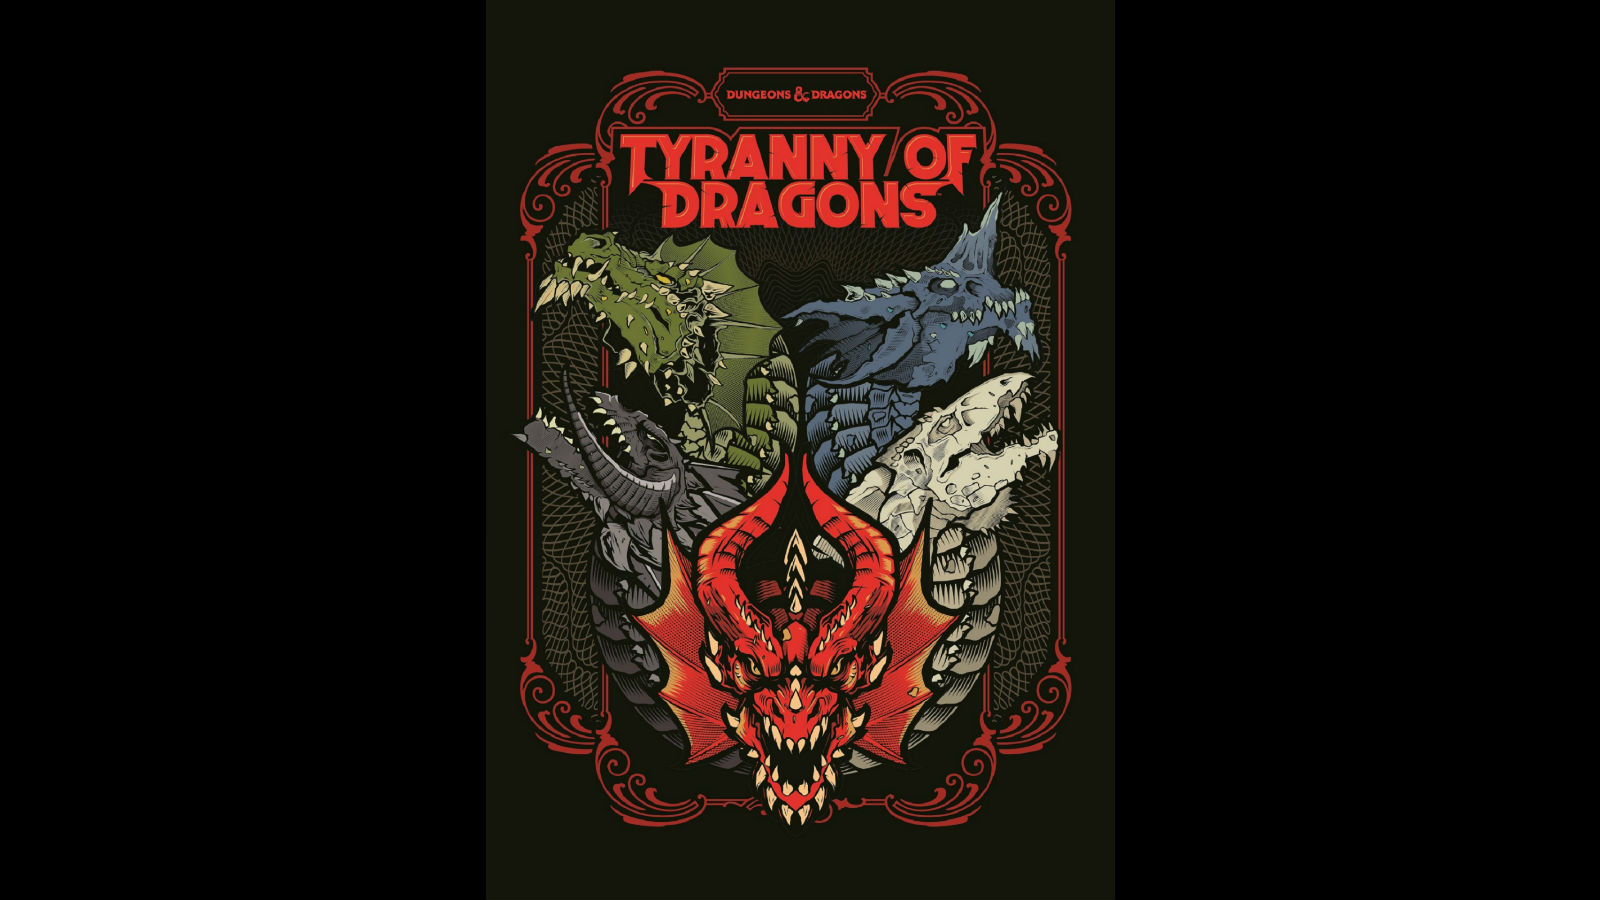 Tyranny of Dragons rerelease marks 5 years of Dungeons & Dragons 5th